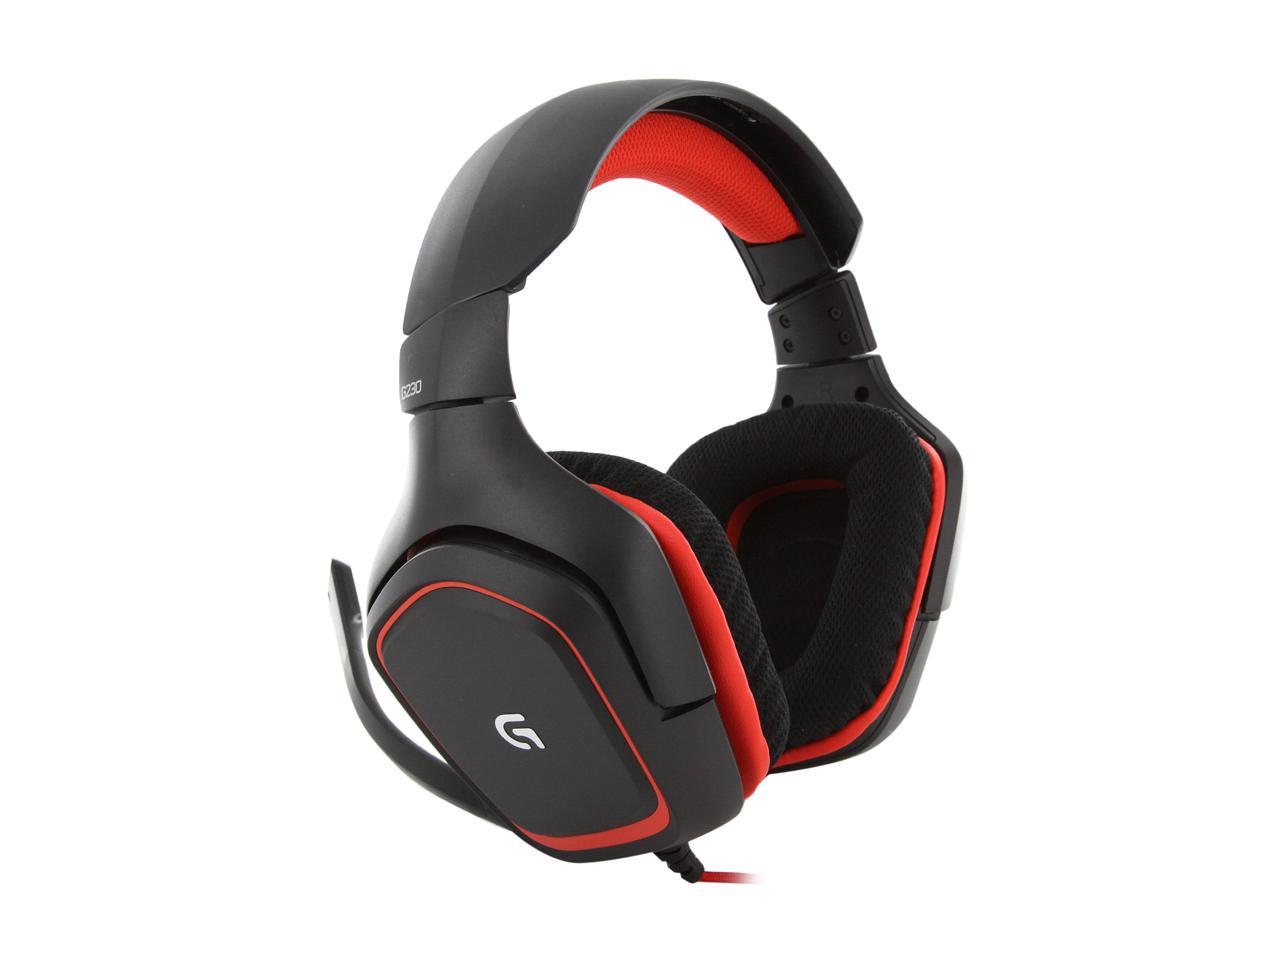 Renewed Logitech G230 Stereo Gaming Headset with mic